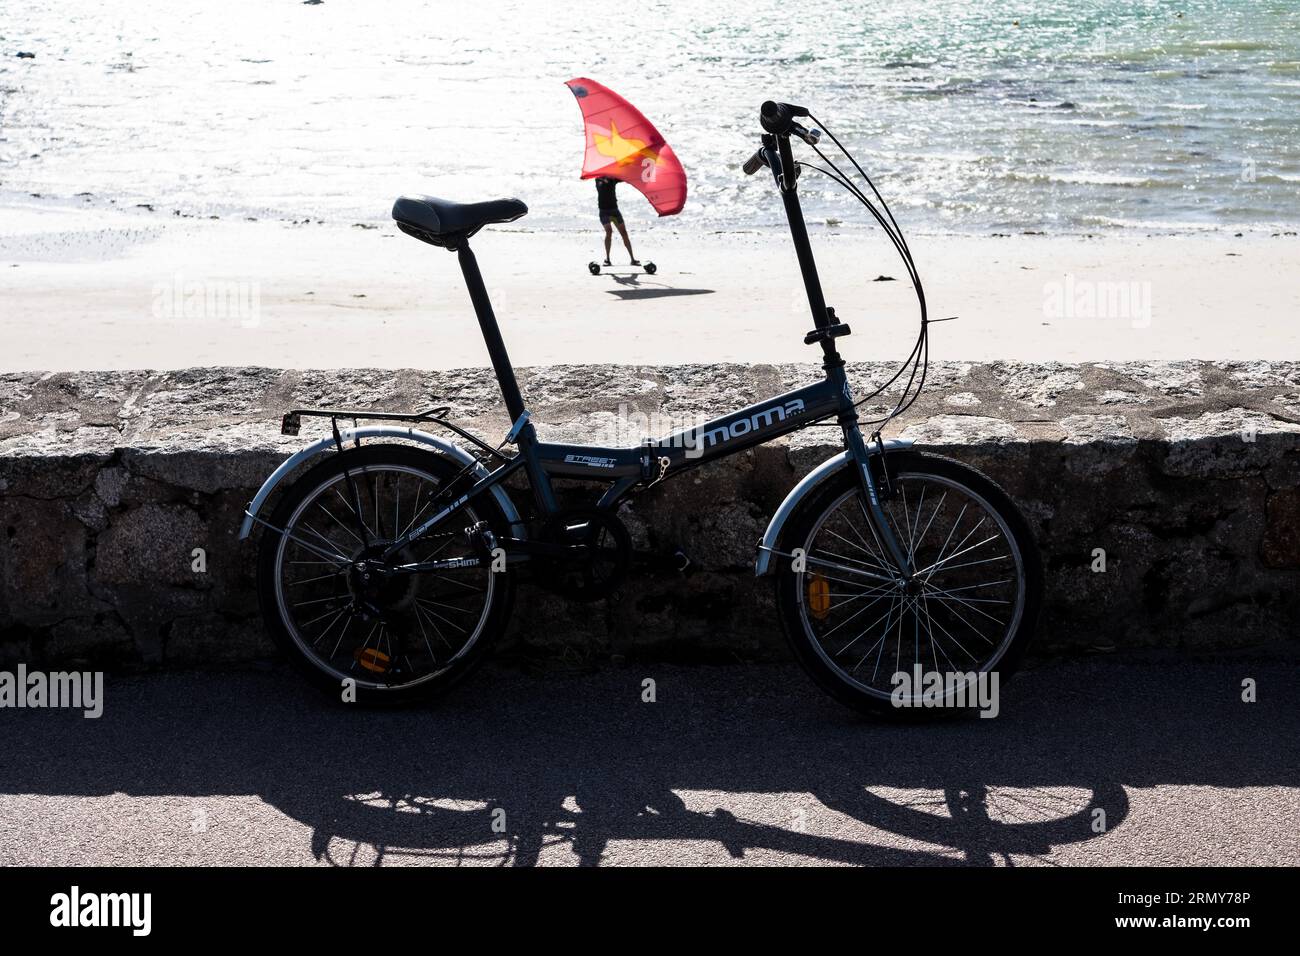 A Moma folding bike with a land windsurfer passing by on a beach in the background Stock Photo